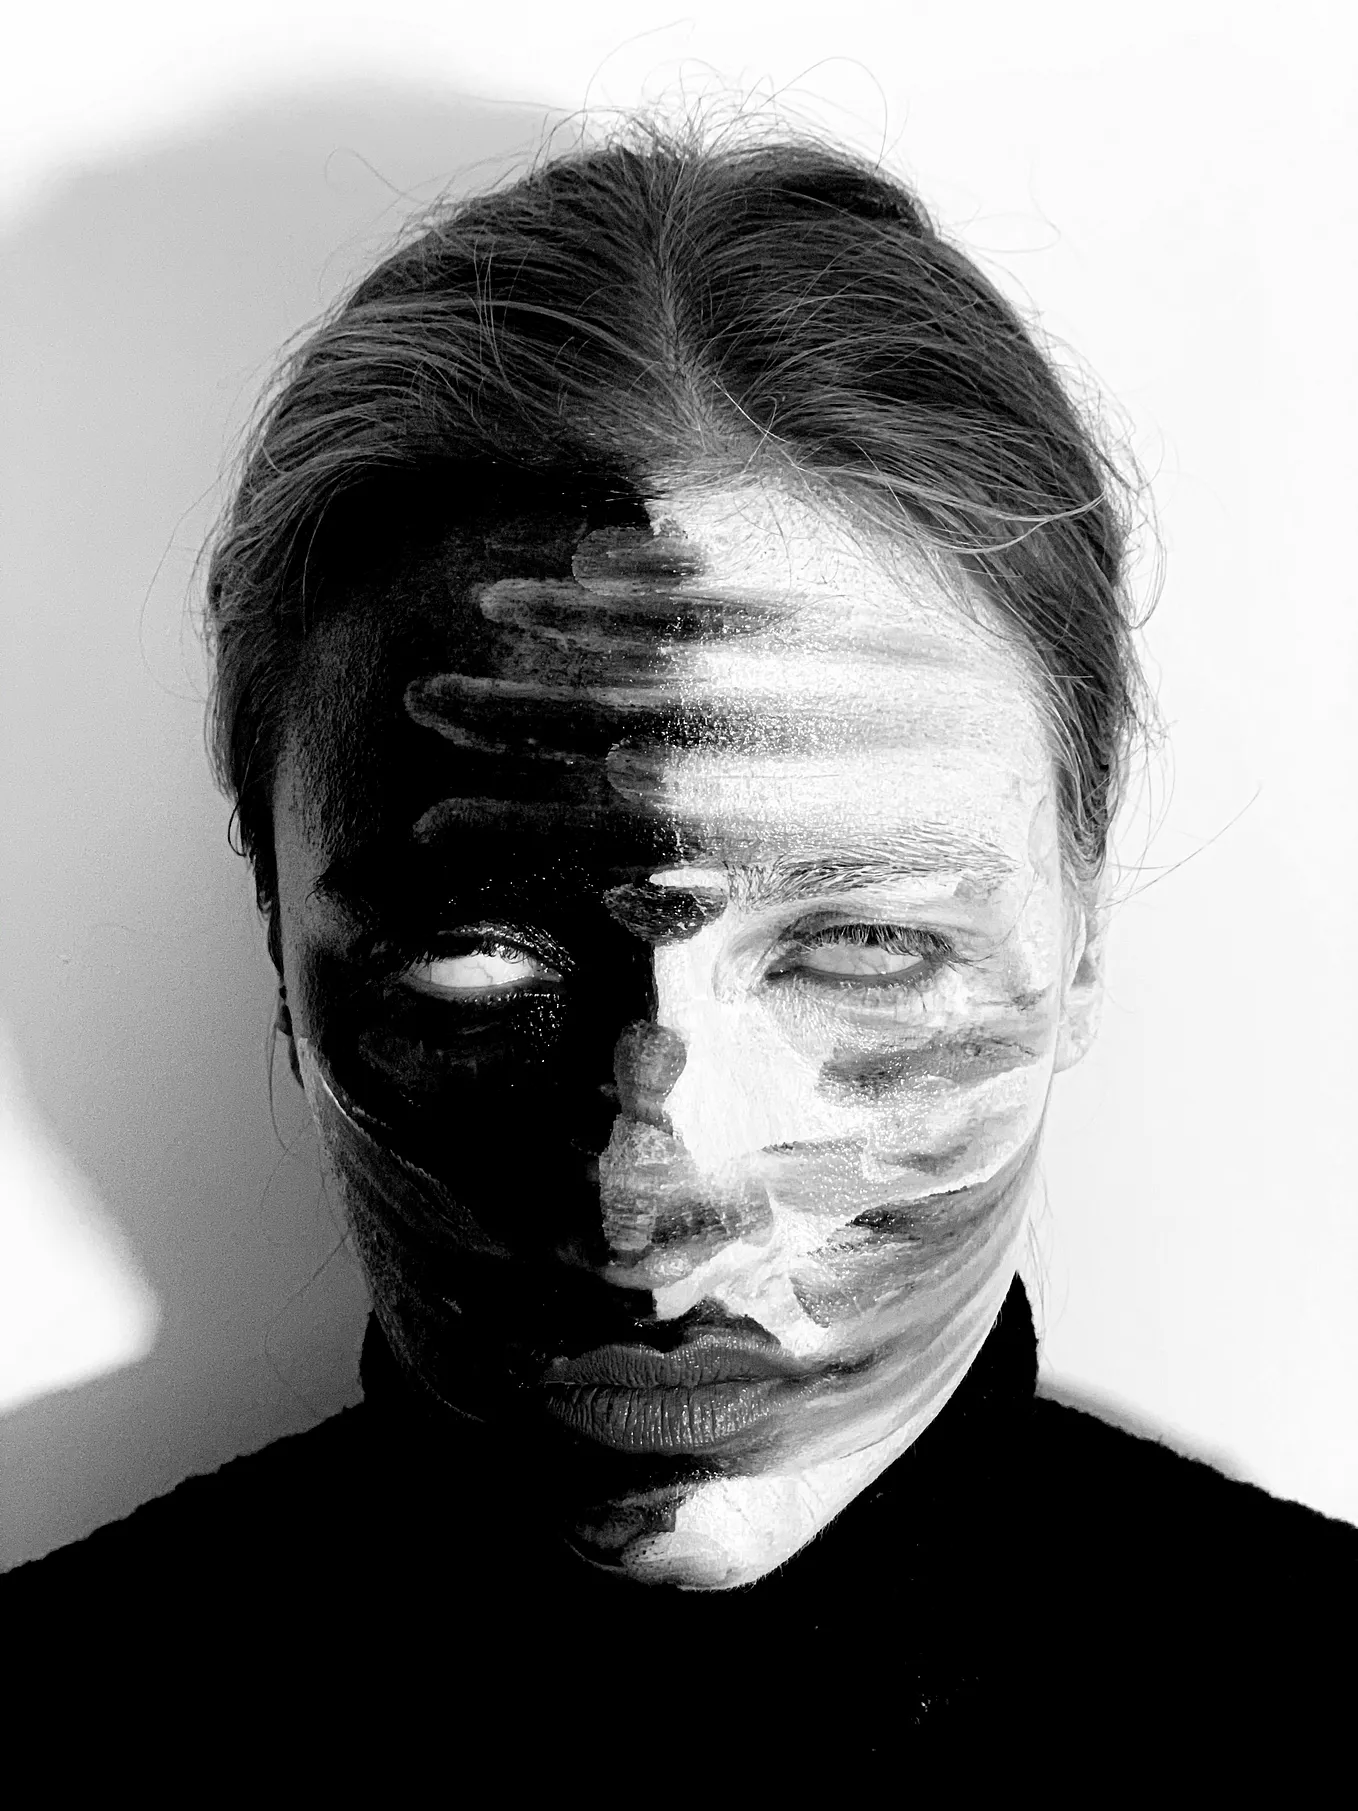 The image is a black and white portrait of a person with their face partially painted or cast in shadow, creating a stark contrast. The painting or shadow creates horizontal stripes across the face, which obscures the person’s features and gives a slightly abstract or artistic effect. The person is wearing a black top, and the background appears to be plain and light-colored, adding to the contrast.